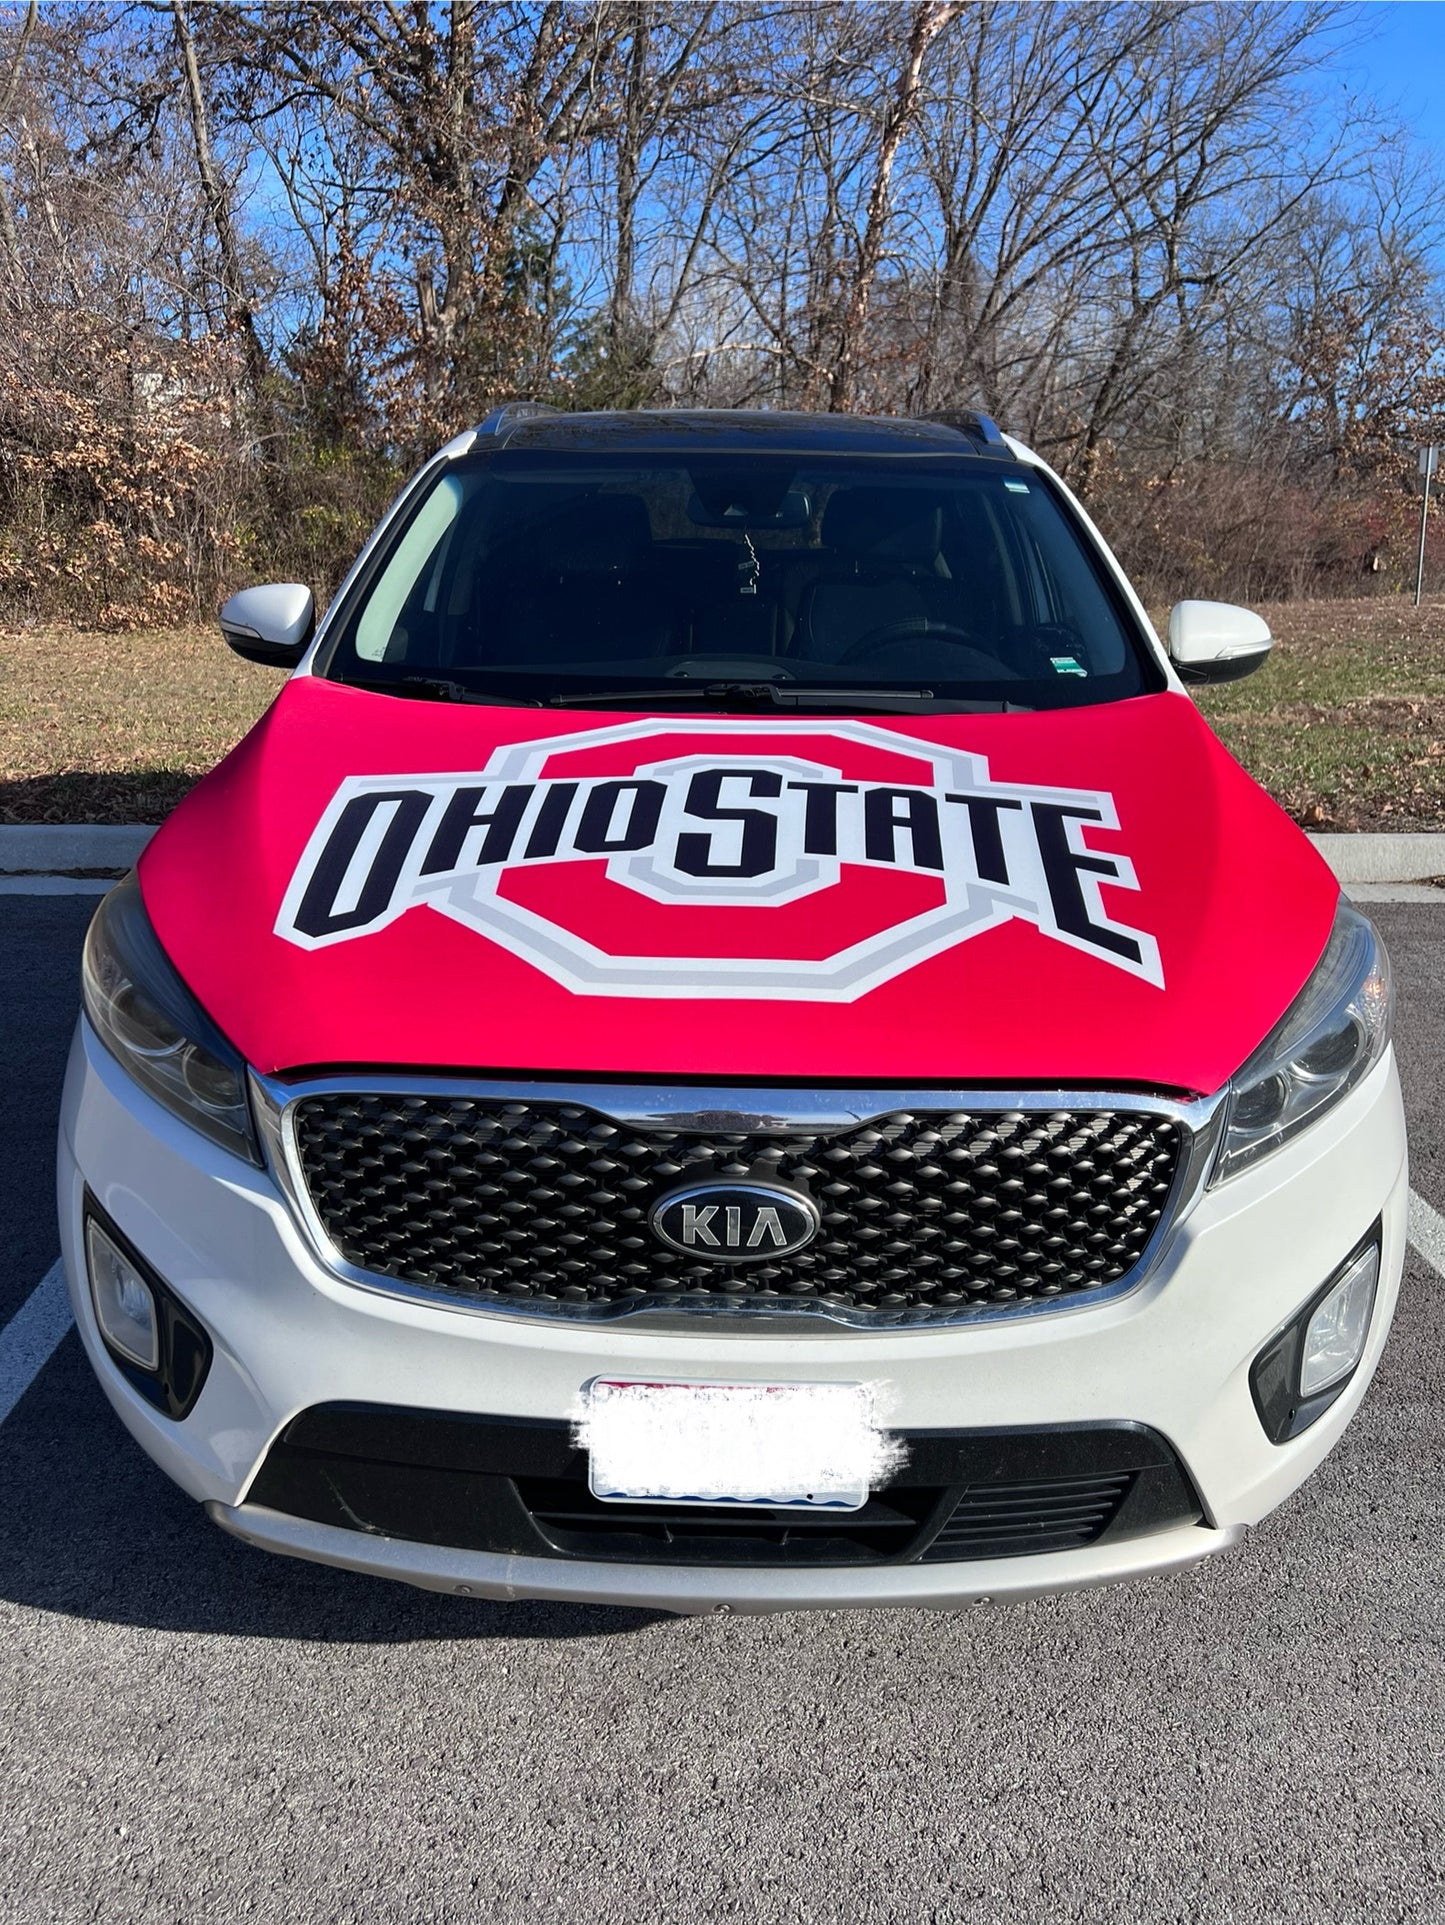 Ohio State College Car Hood Cover